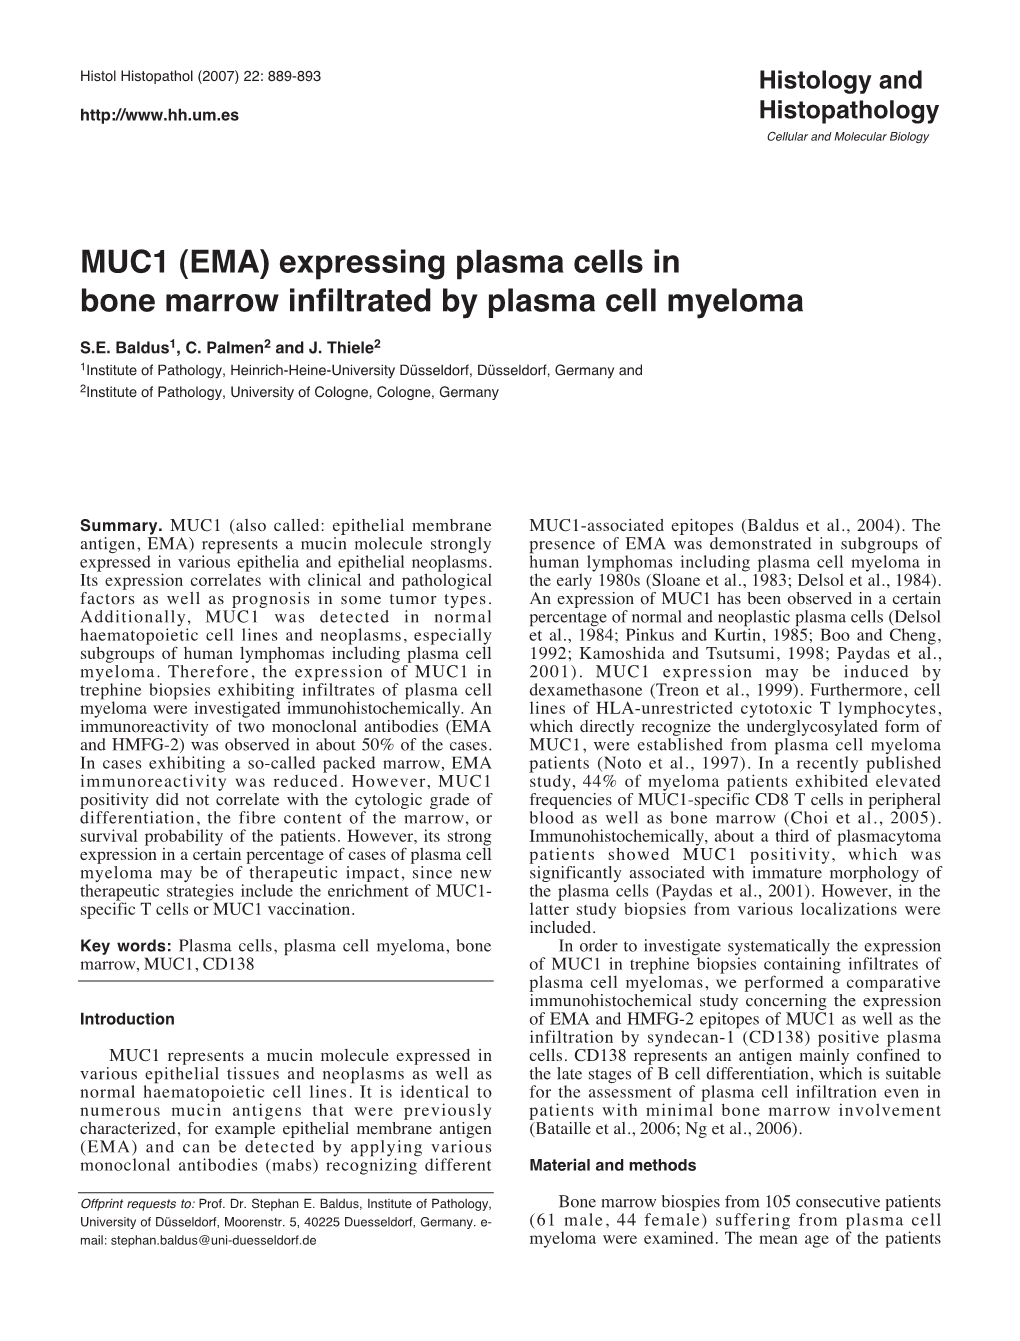 MUC1 (EMA) Expressing Plasma Cells in Bone Marrow Infiltrated by Plasma Cell Myeloma S.E